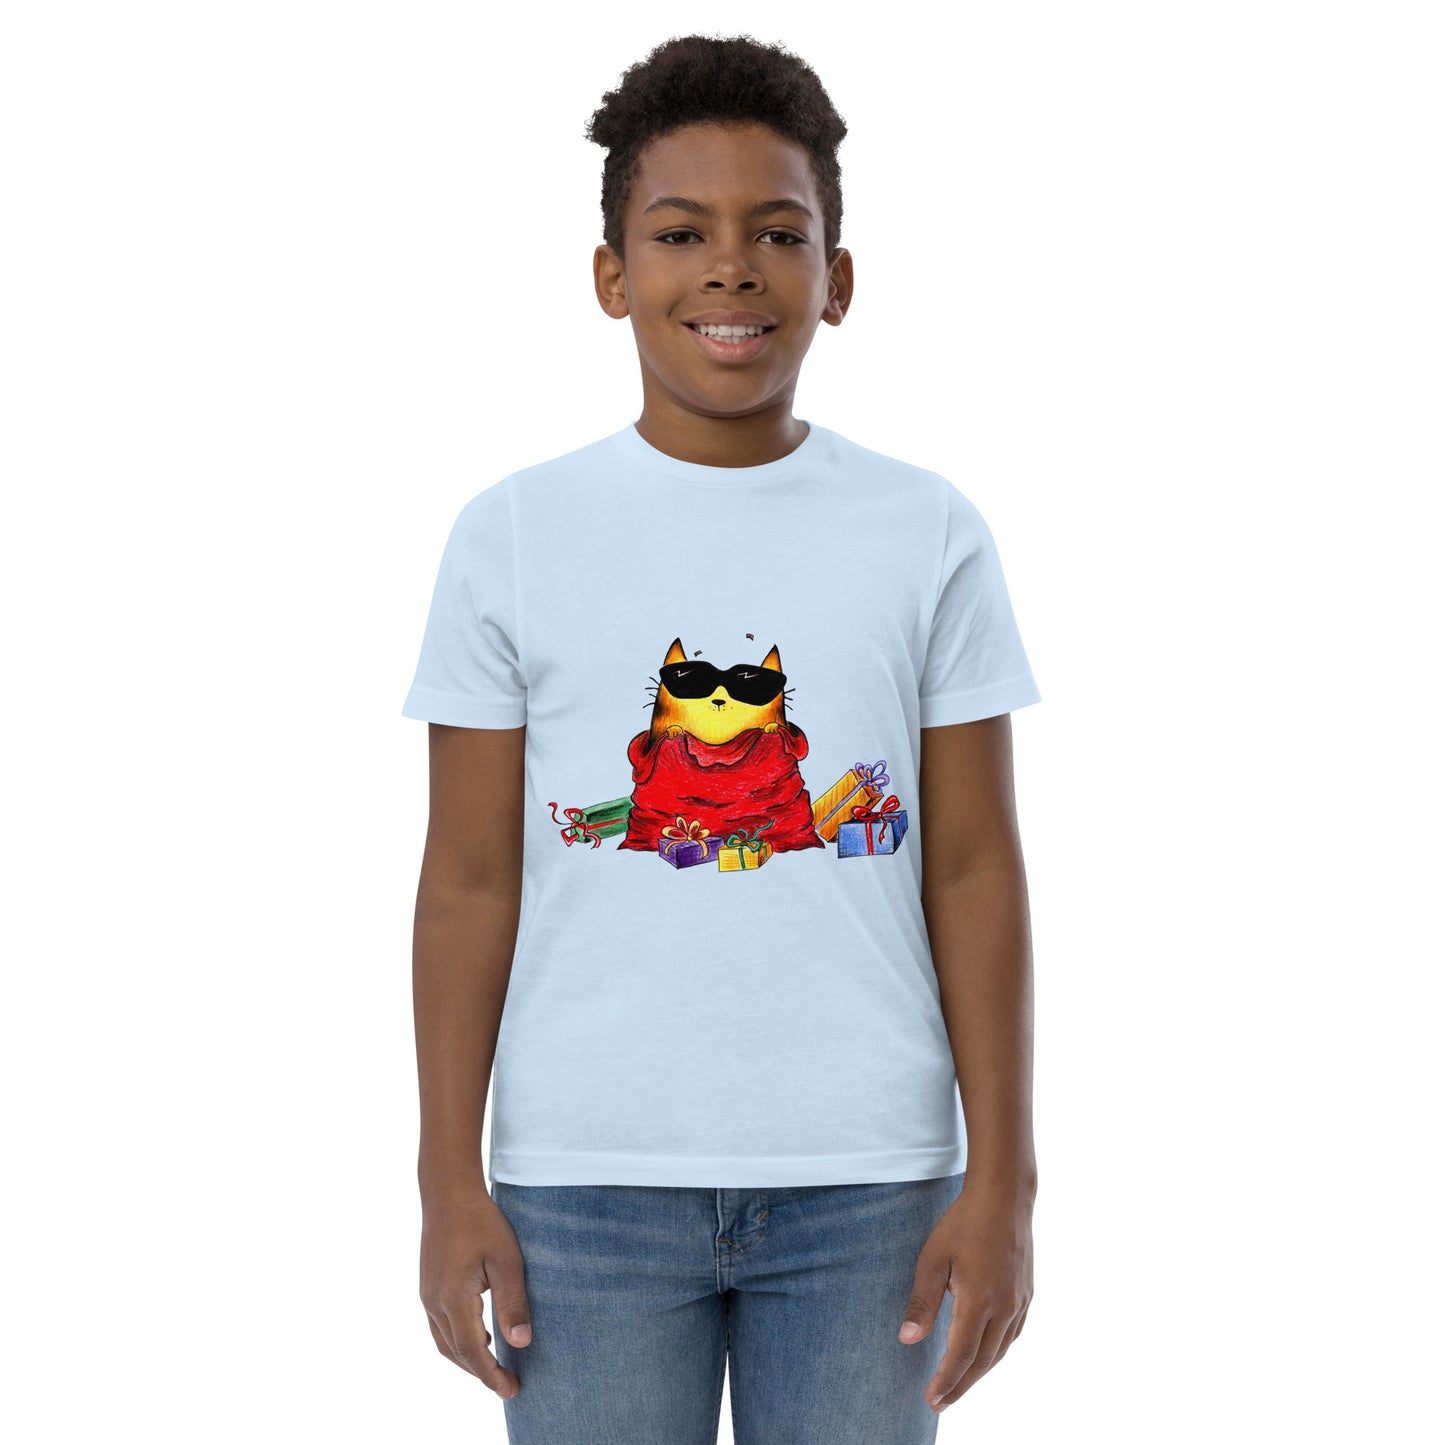 Youth T-shirt "Christmas Cat with Gifts"